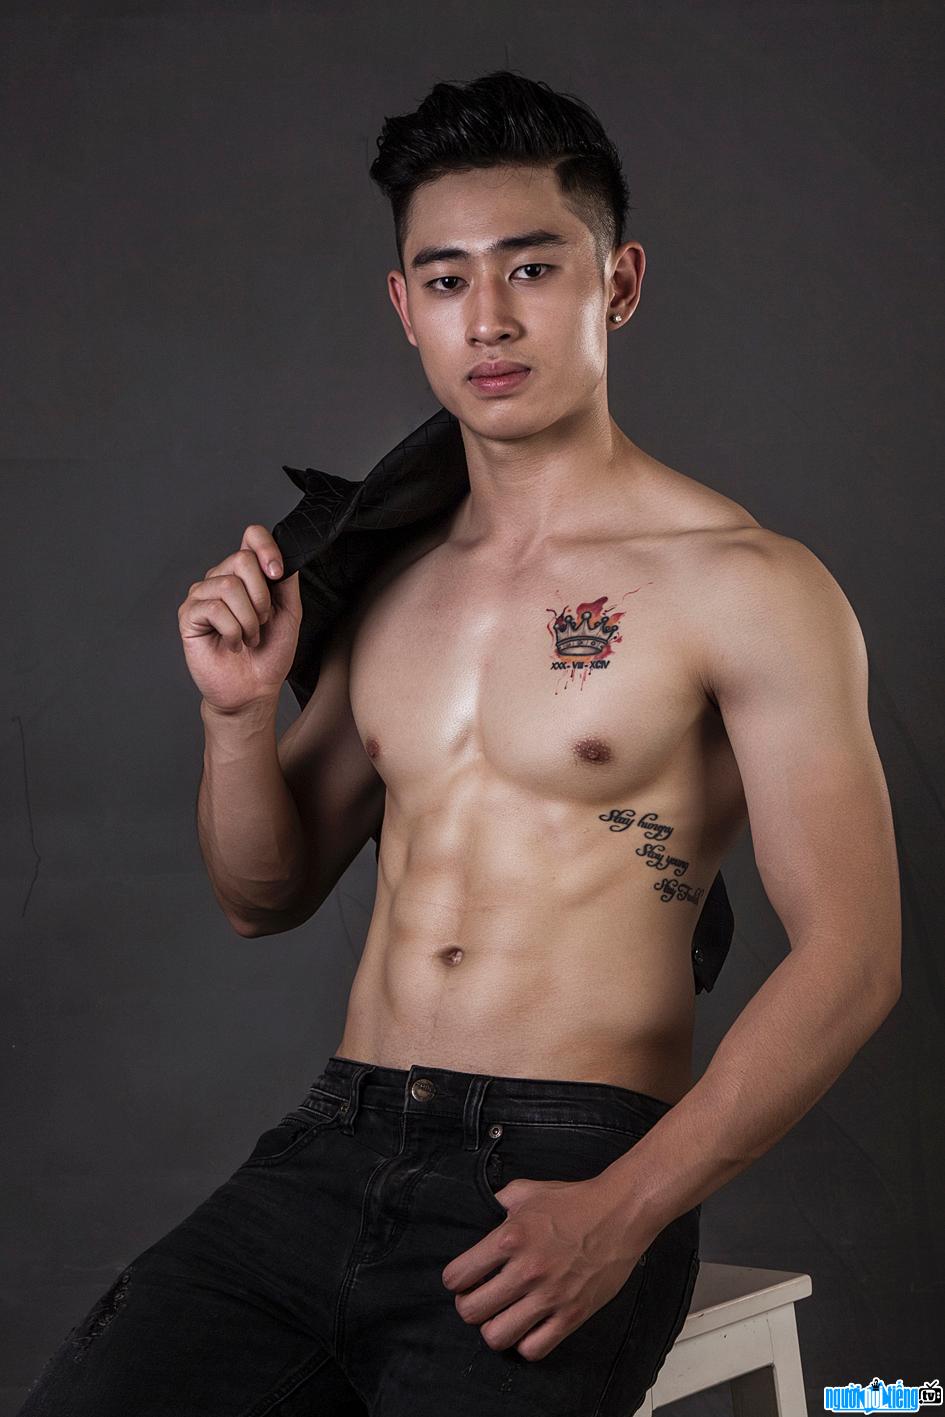  Model Nguyen Tien Dat used to Runner-up of the 2016 Body Model Contest